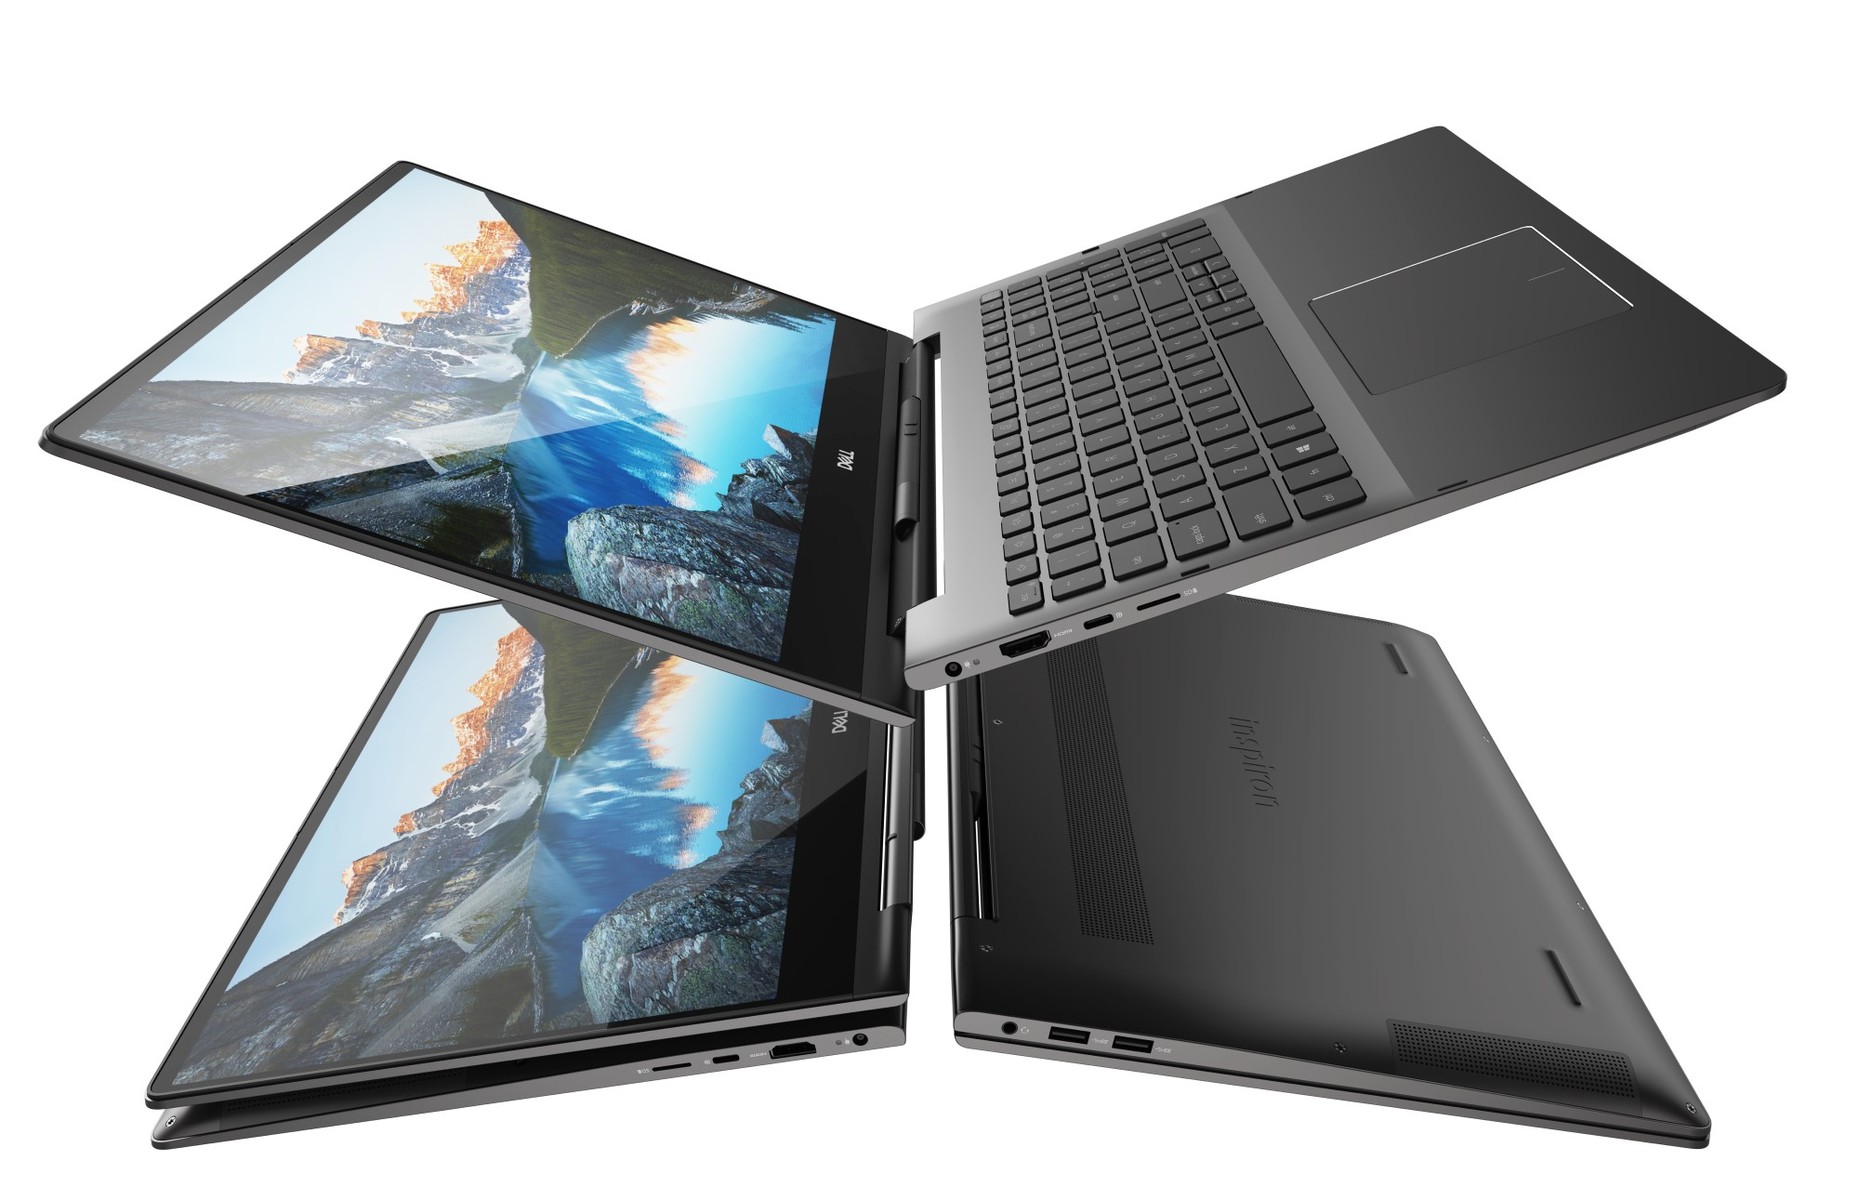 Dell updates the Inspiron 13 7000 2-in-1 and Inspiron 15 7000 2-in